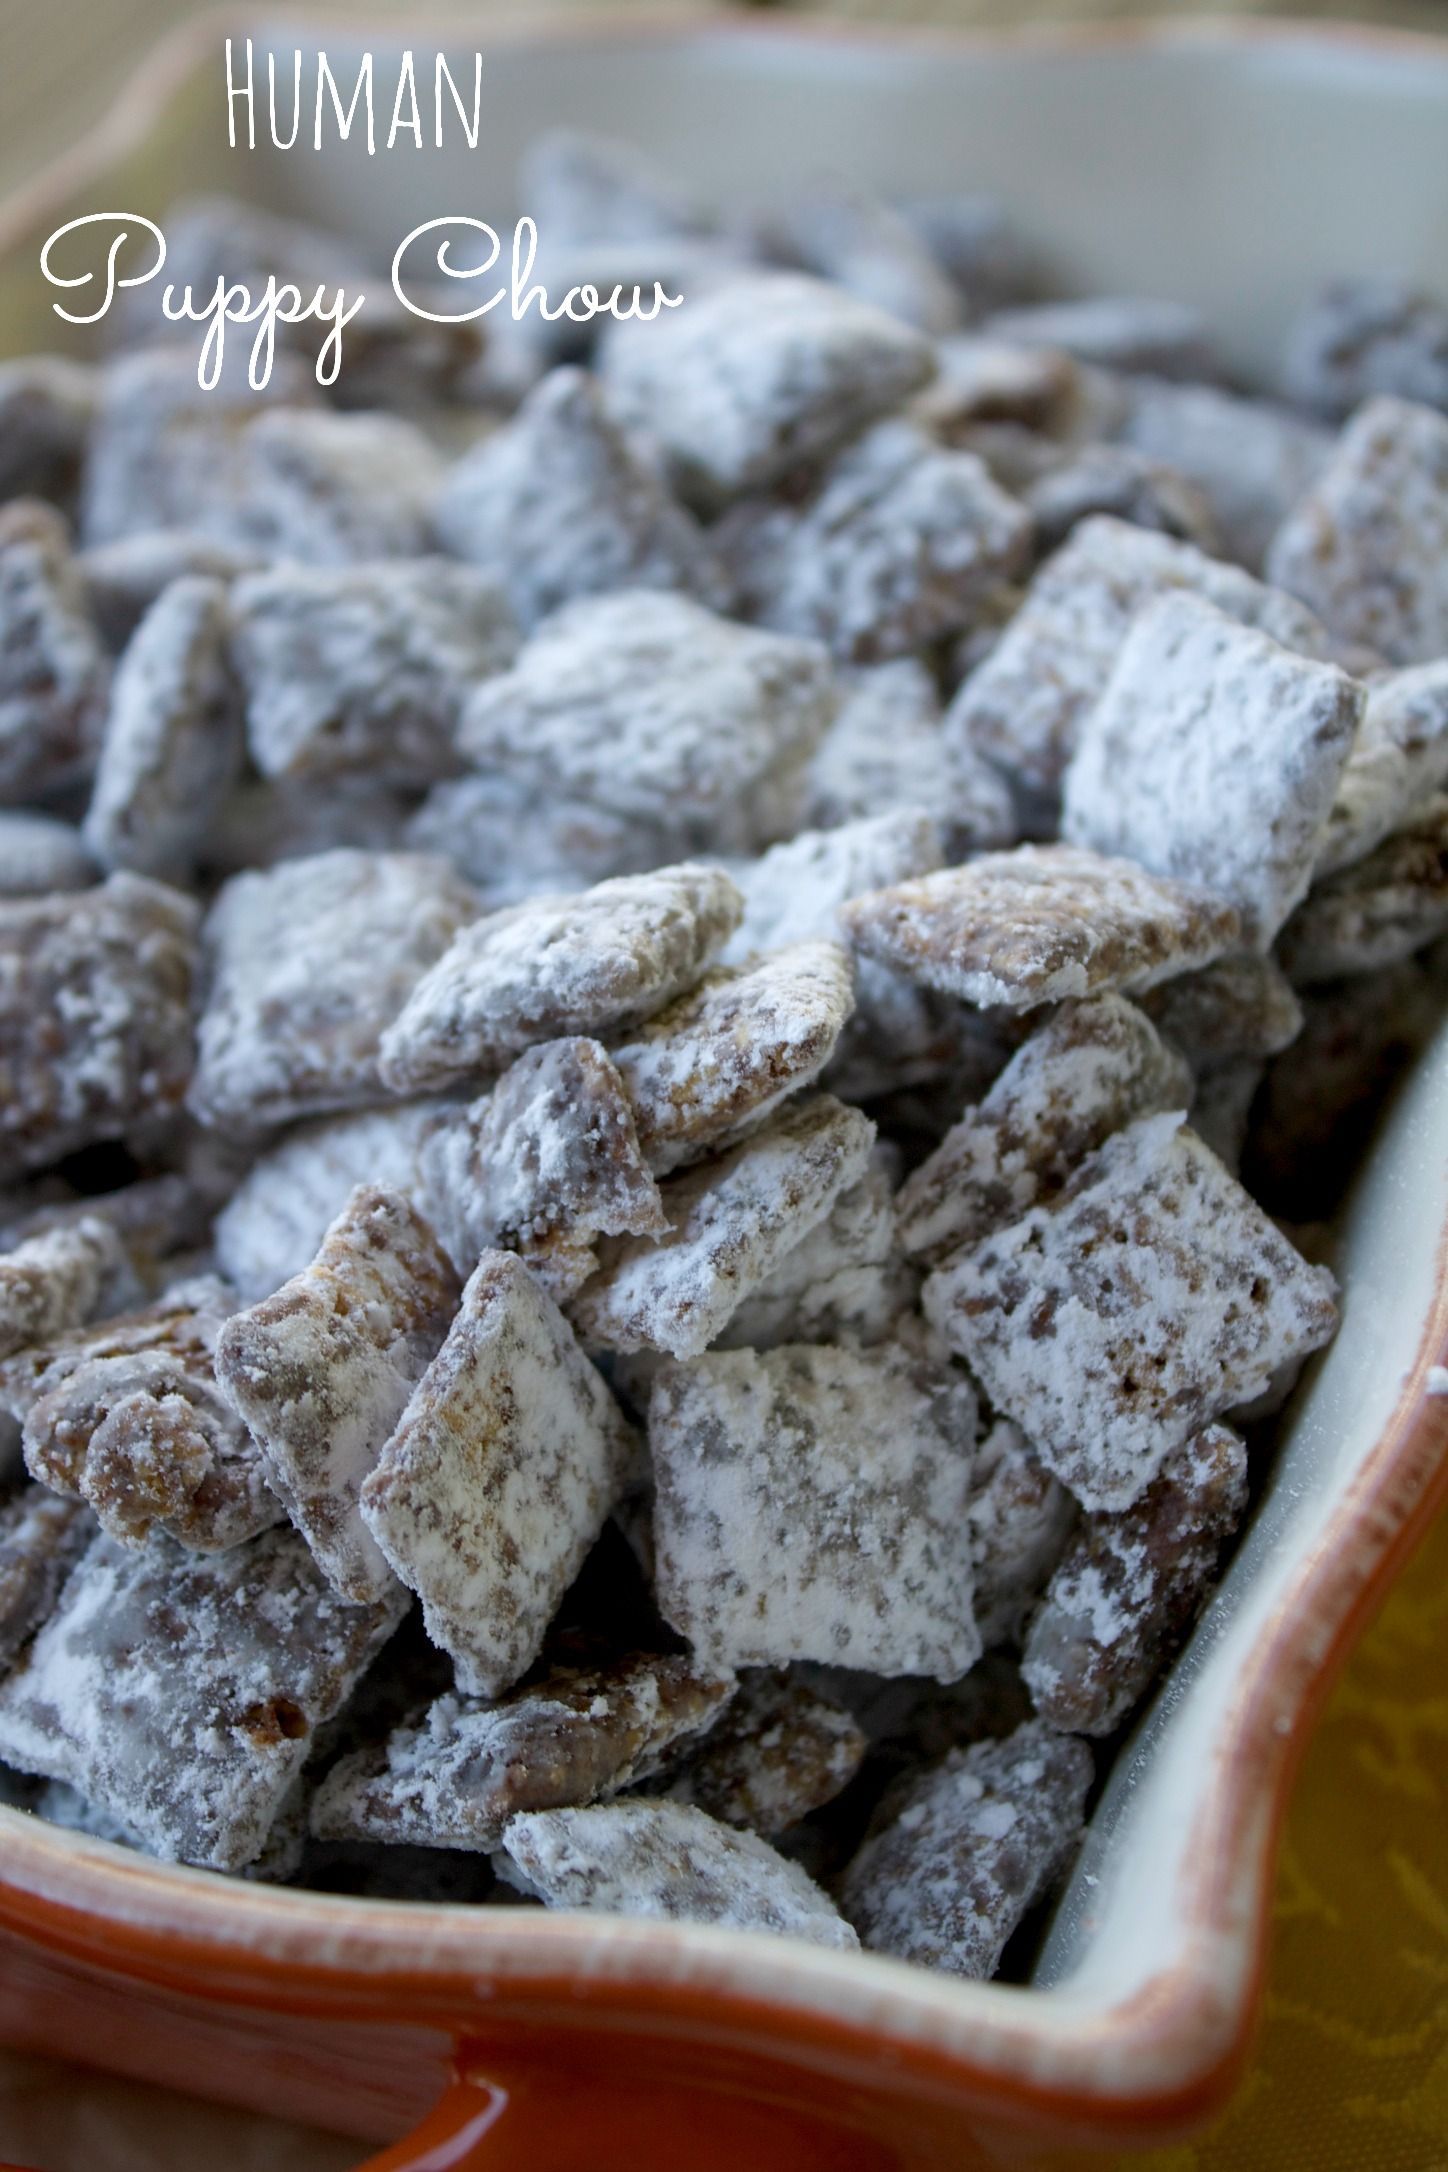 Human Puppy Chow-Chex Mix Recipe Just five ingredients and ten minutes are needed to make puppy chow, a sweet kid-friendly